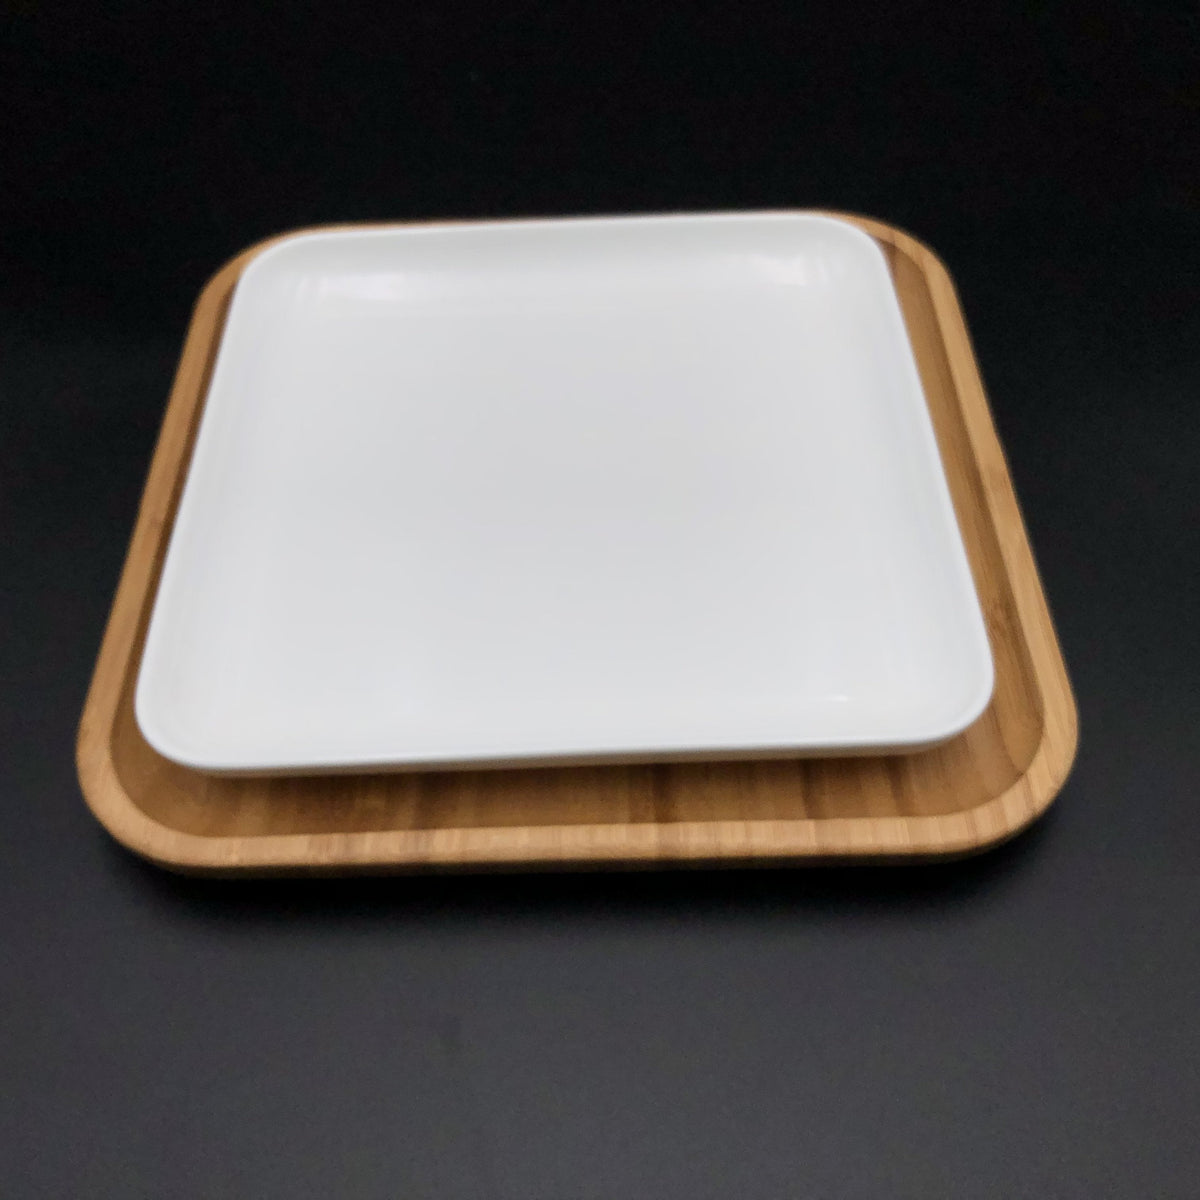 Wilmax Large Feast Charcuterie Plating Set Including Long Bamboo Serving Tray And Square Bamboo Platters With Fine Porcelain Plates To Match SKU: WL-555028